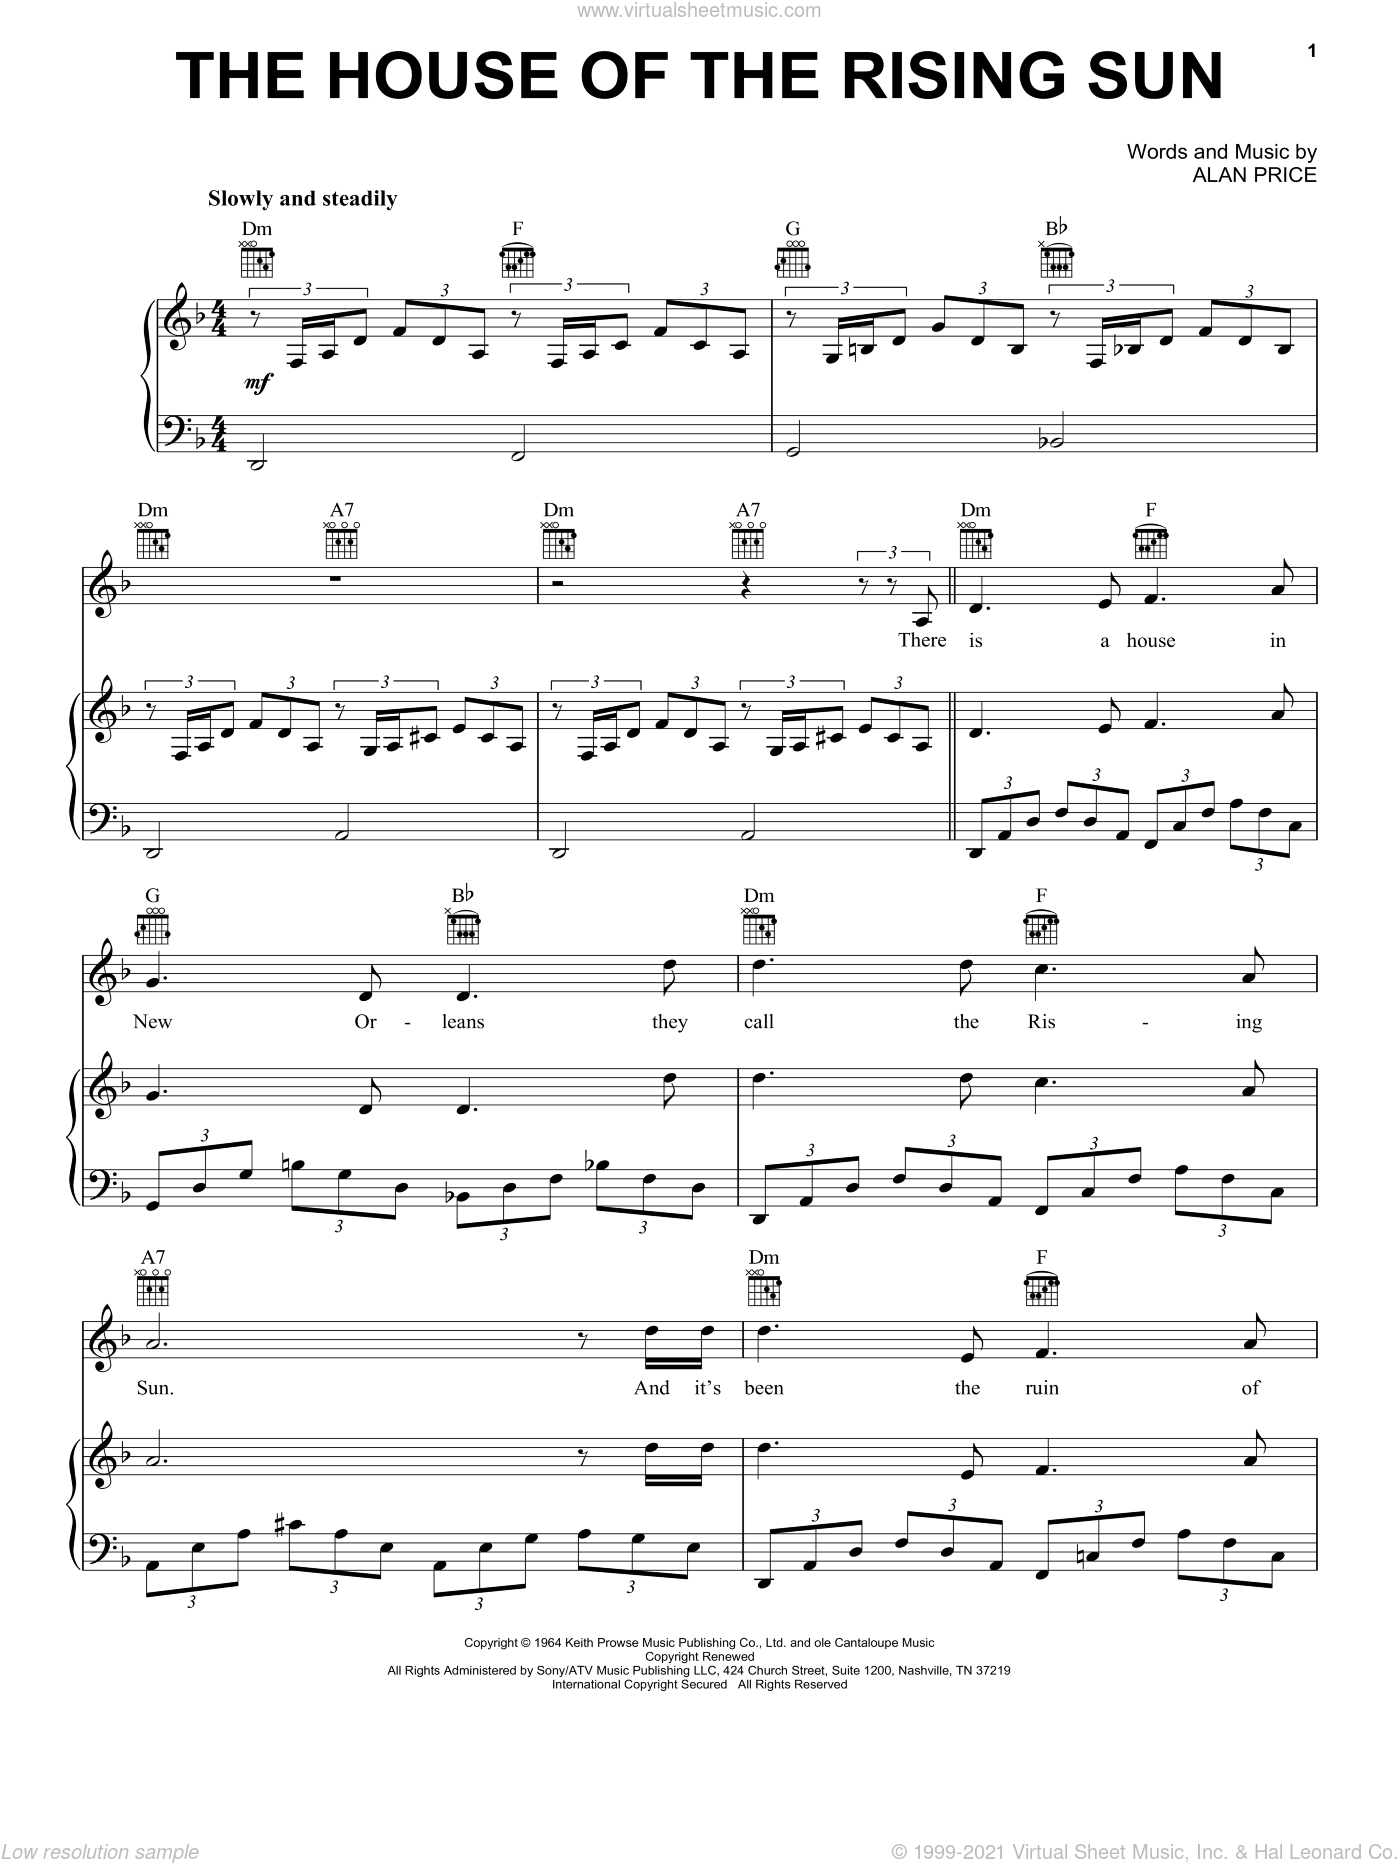 Animals The House Of The Rising Sun Sheet Music For Voice Piano Or Guitar,Glamorous Romantic Bedroom Master Bedroom Pinterest Bedroom Decor